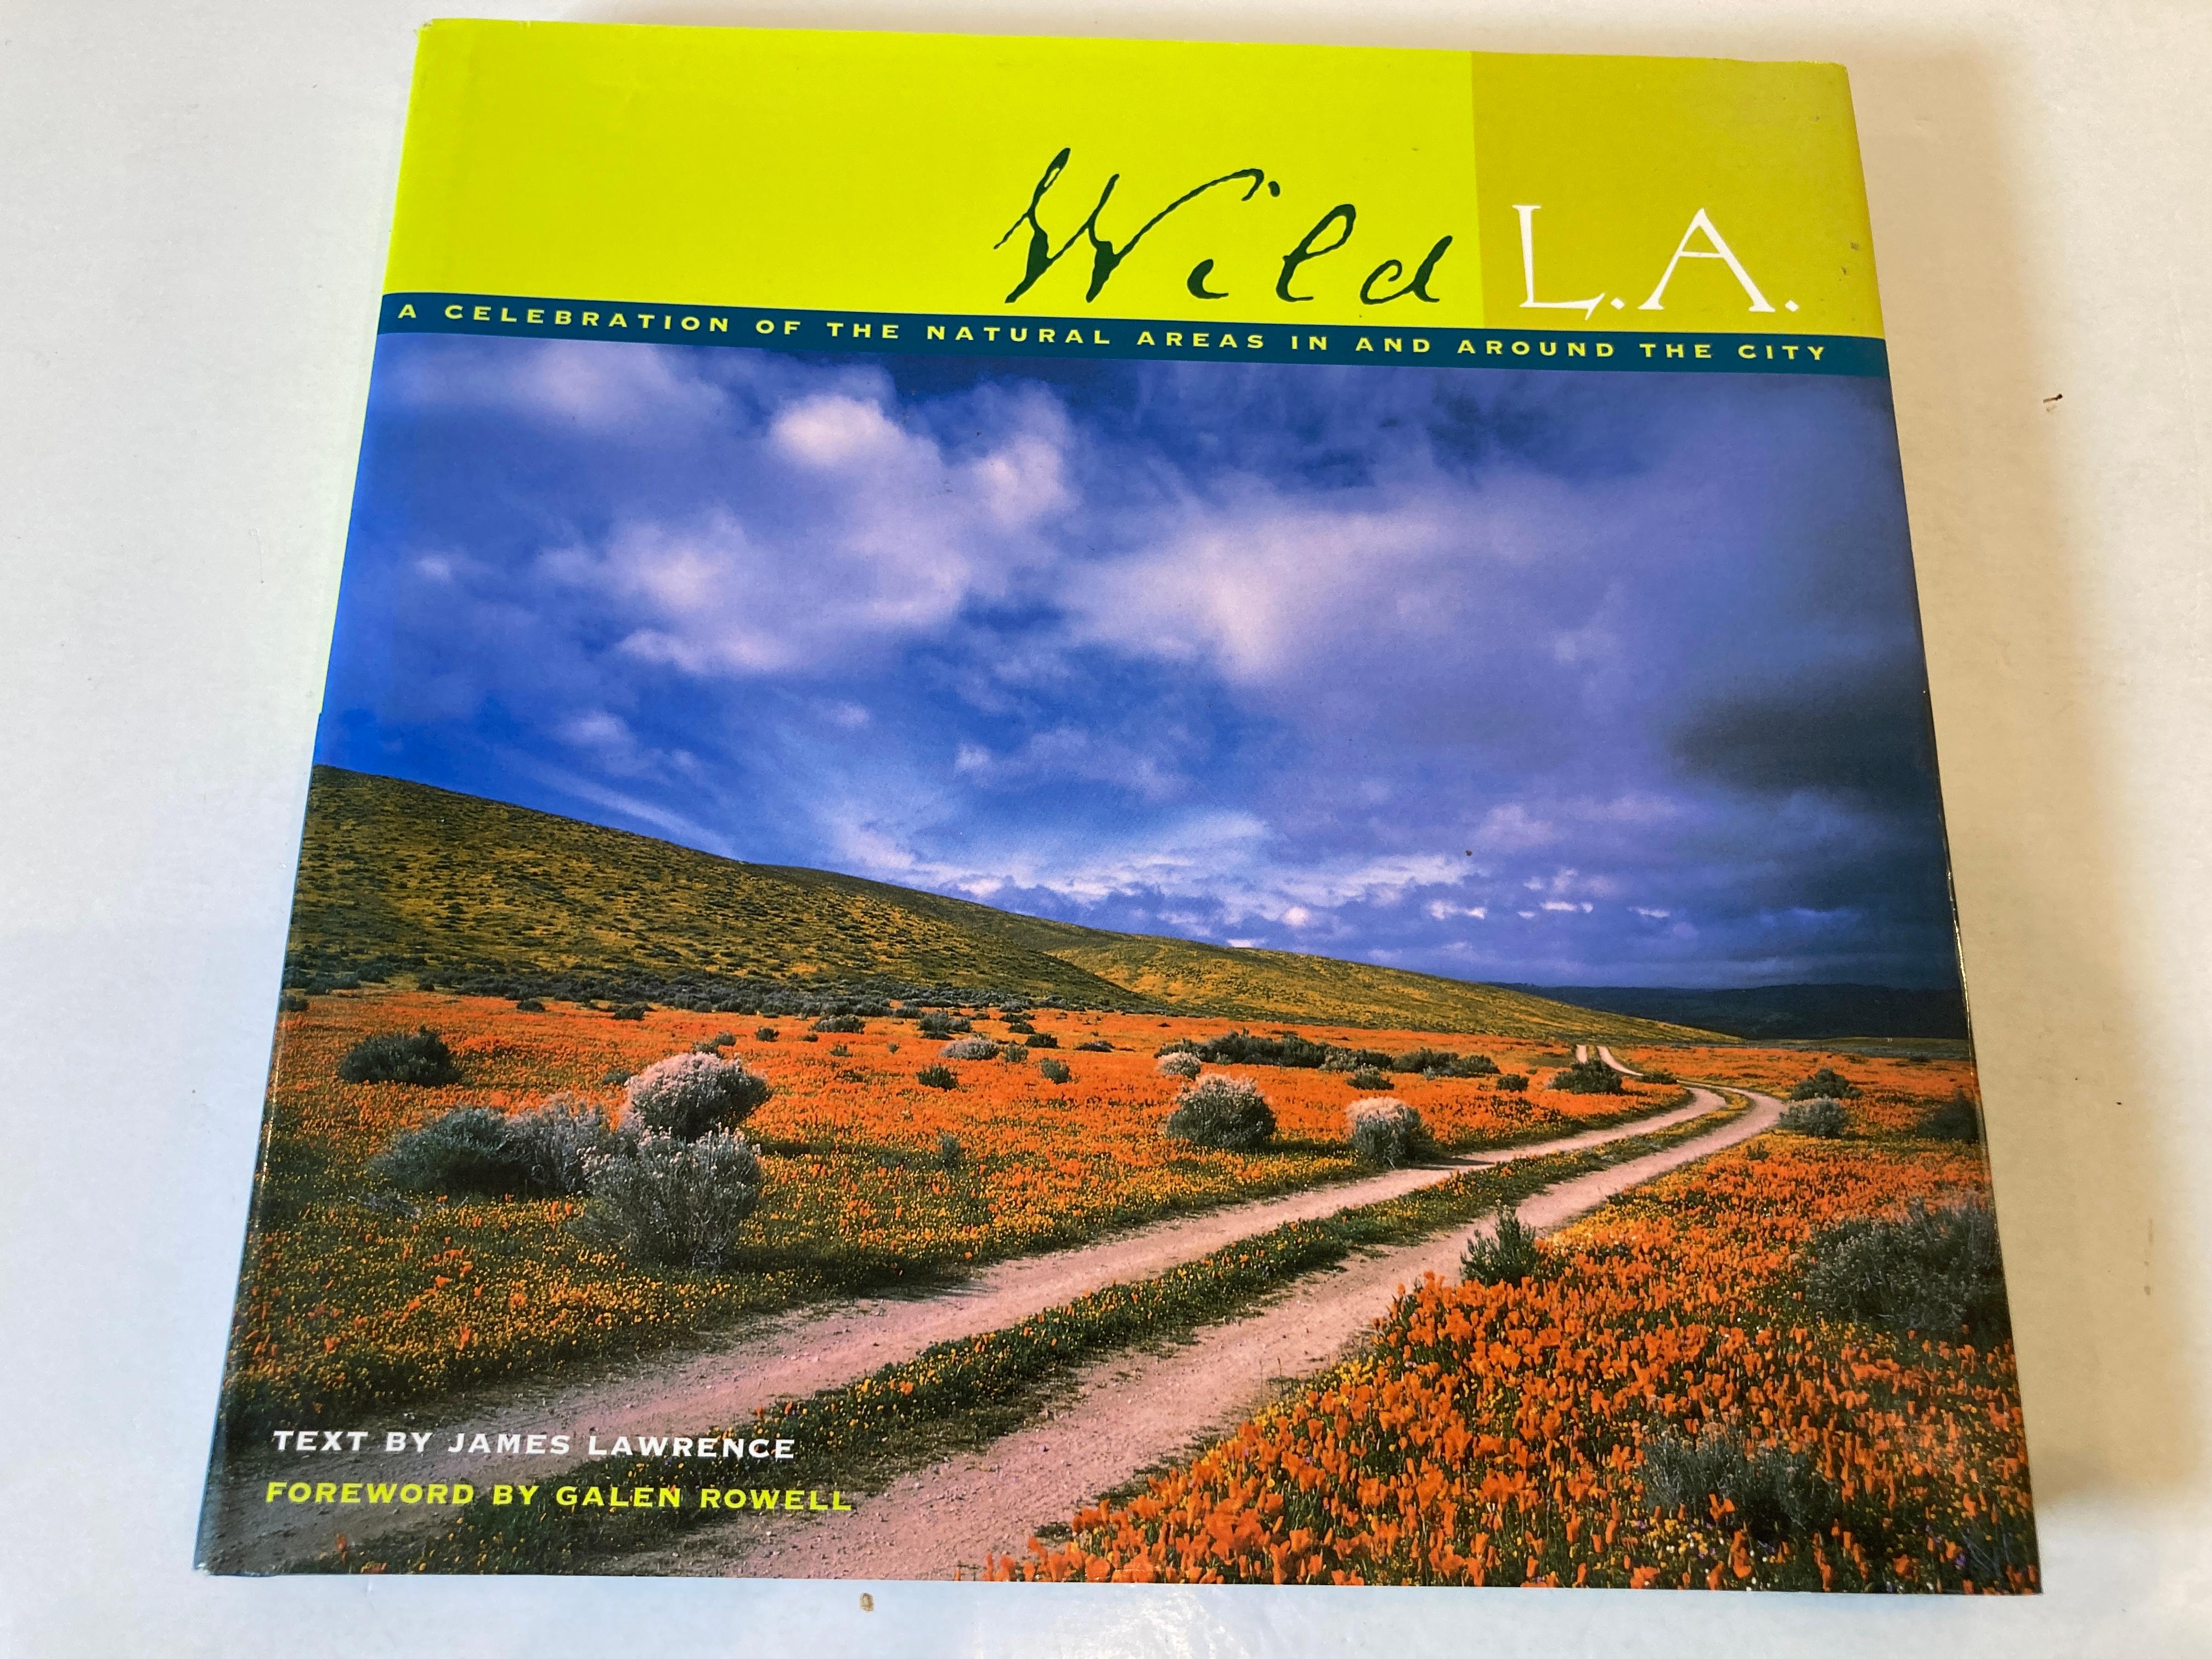 Folk Art Wild L.A. A Celebration of the Natural Areas in and Around Hardcover Book